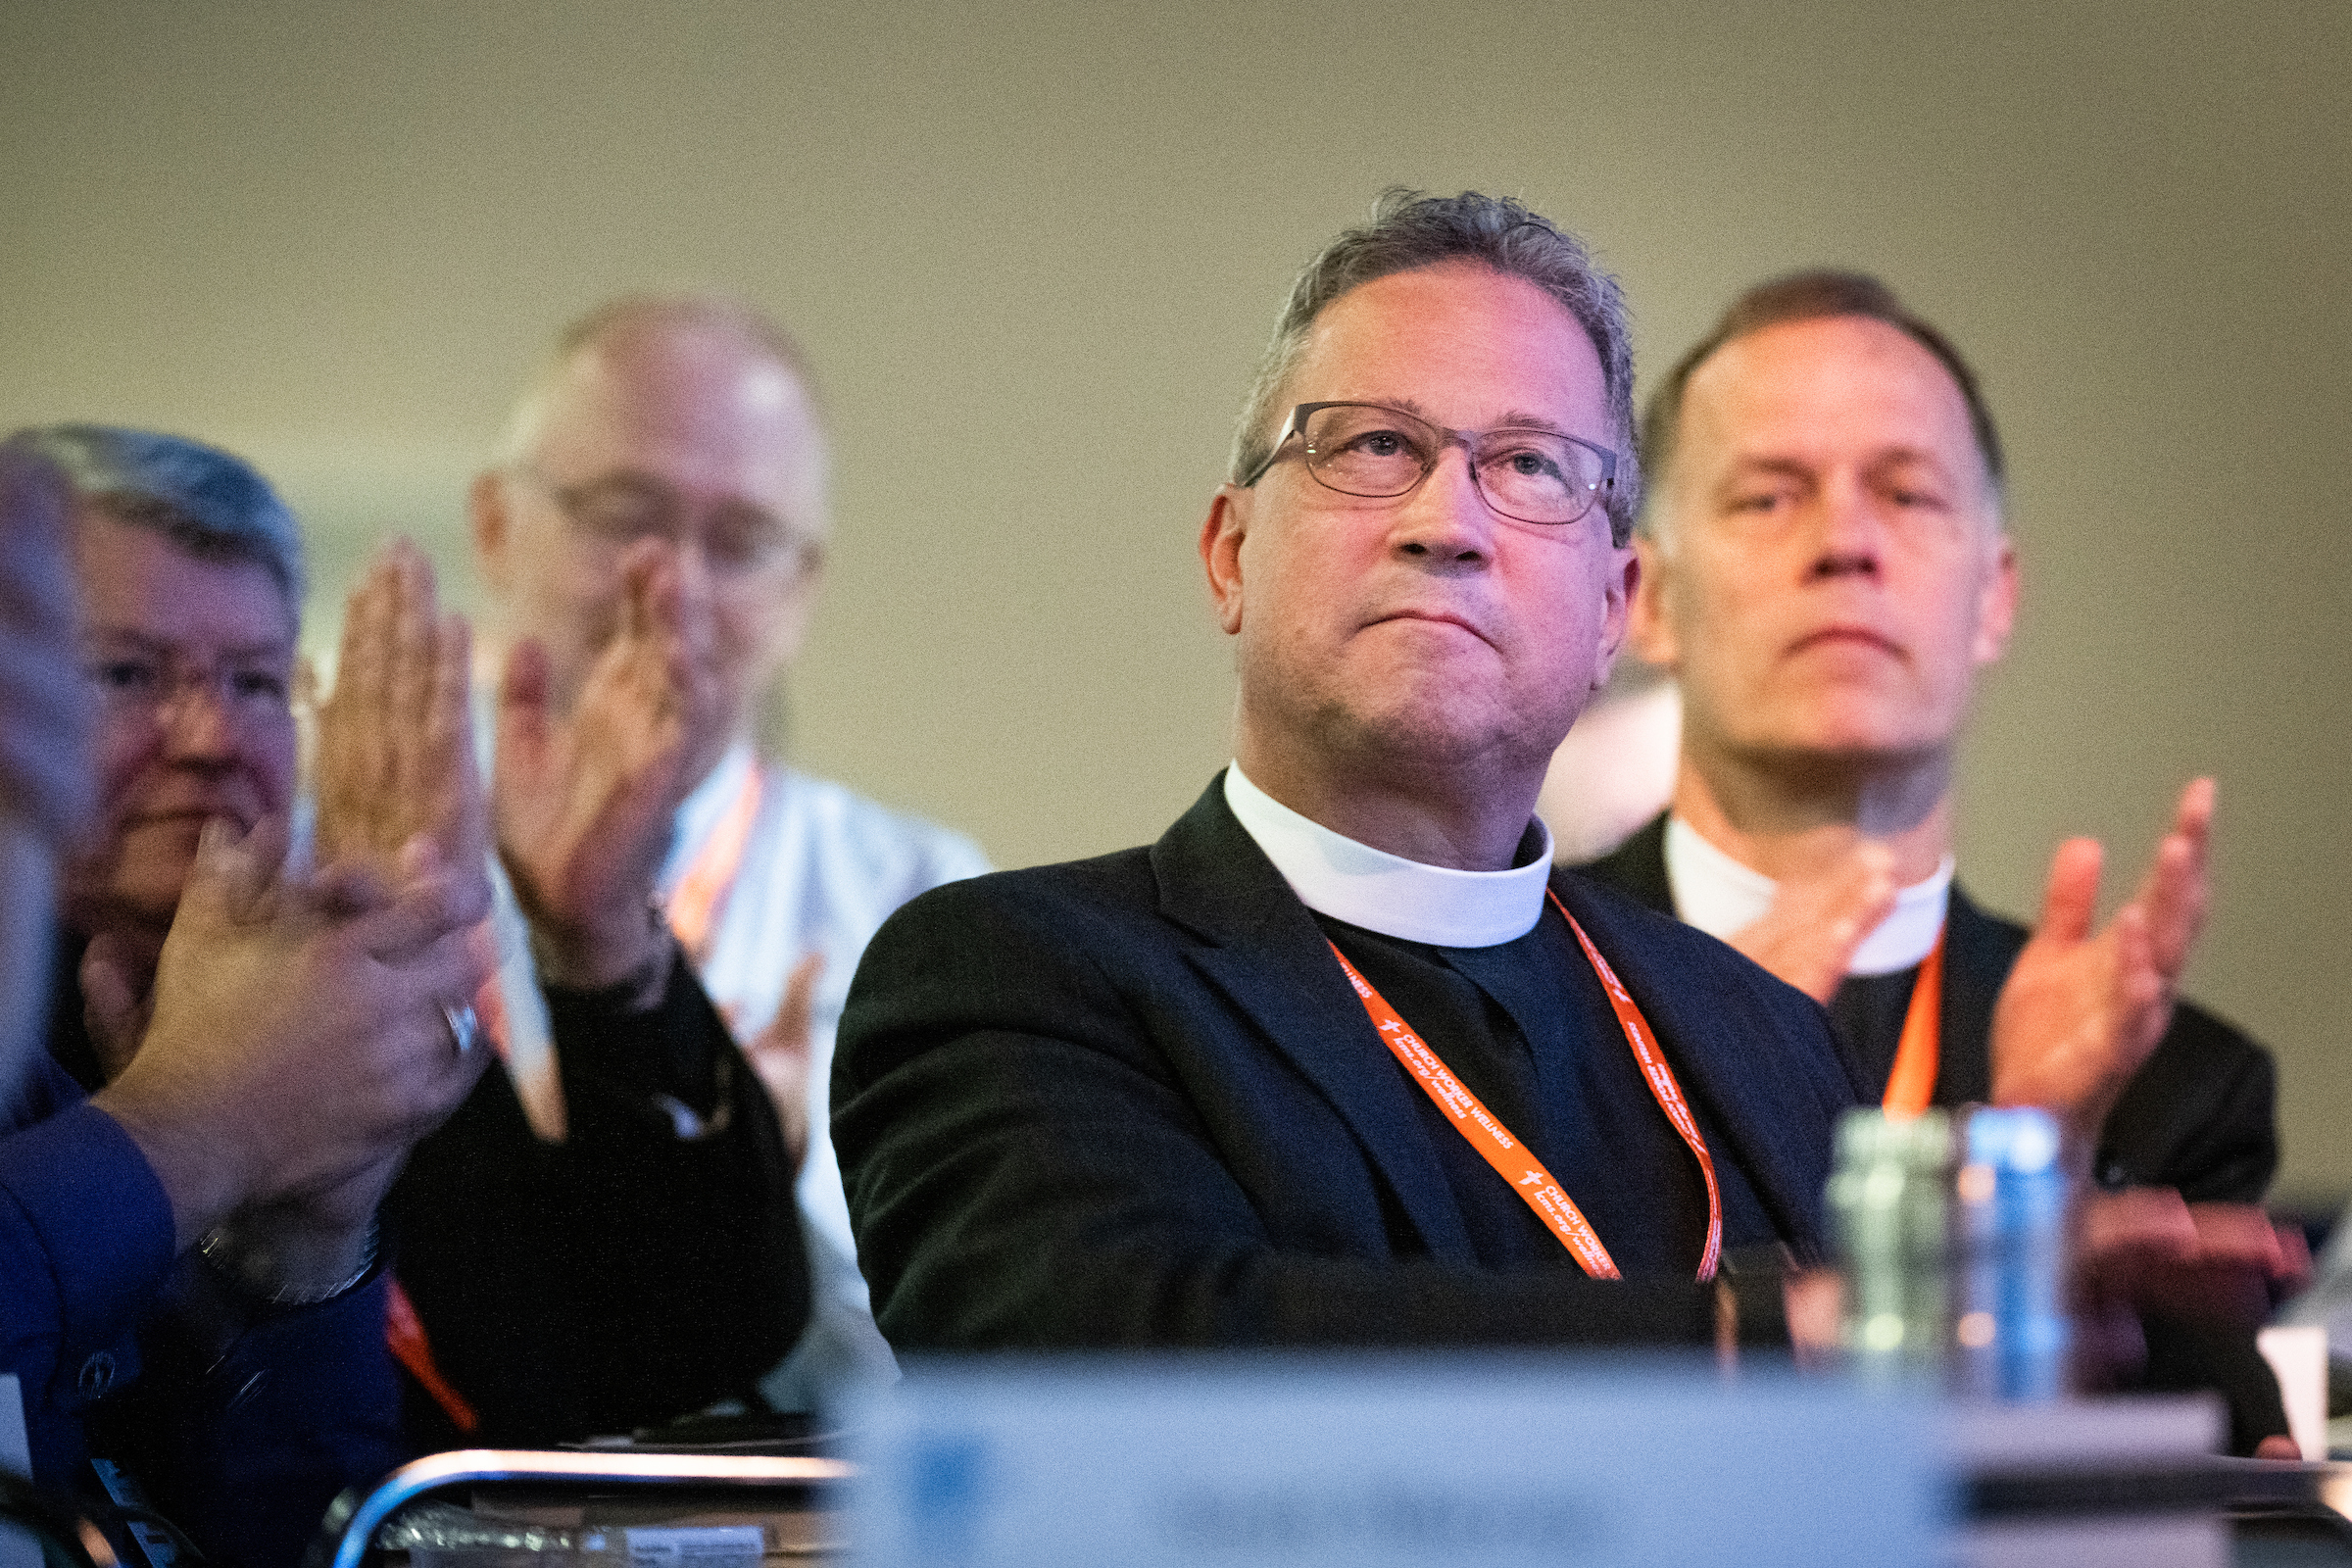 The Rev. Peter K. Lange, president of LCMS Kansas District, receives a round of applause after being elected the Synod's first vice-president during the 67th Regular Convention of The Lutheran ChurchMissouri Synod on Sunday, July 21, 2019, at the Tampa Convention Center in Tampa, Fla. LCMS Communications/Erik M. Lunsford